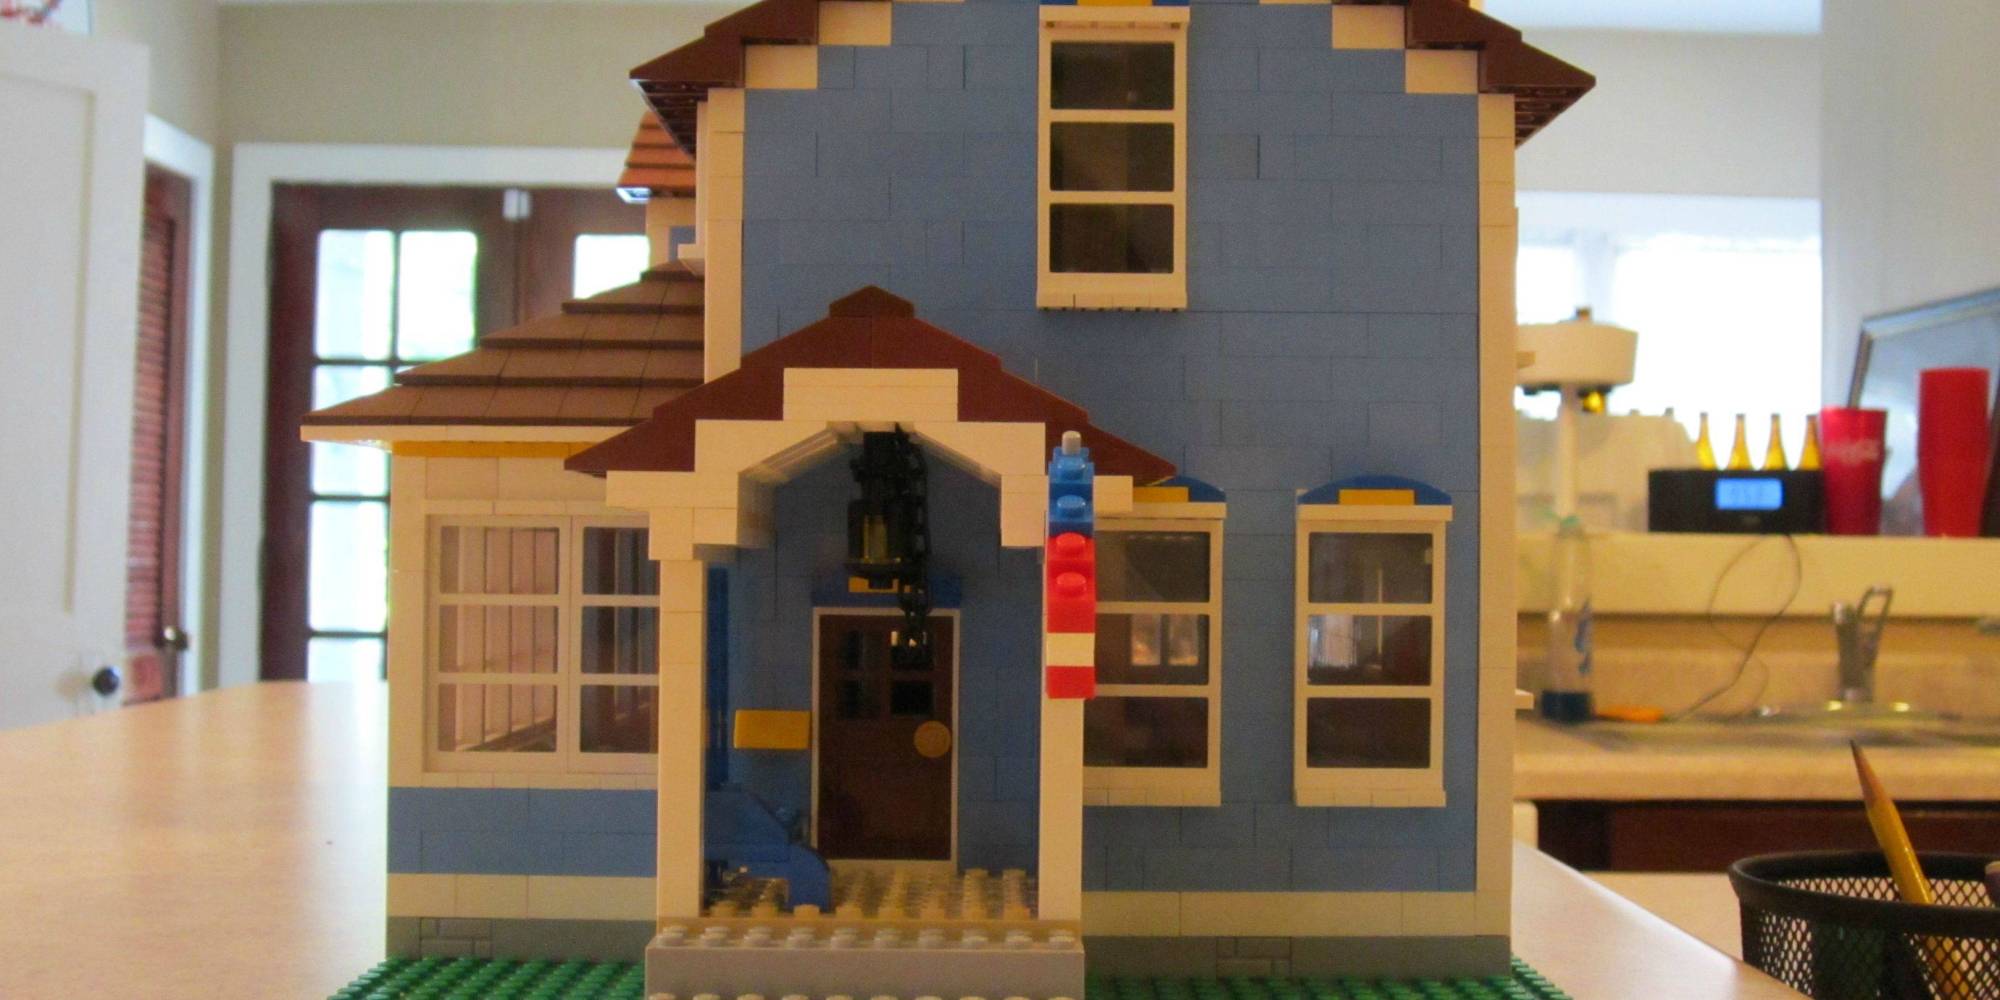 This Man Made An Exact Replica Of His Childhood Home Completely Out Of